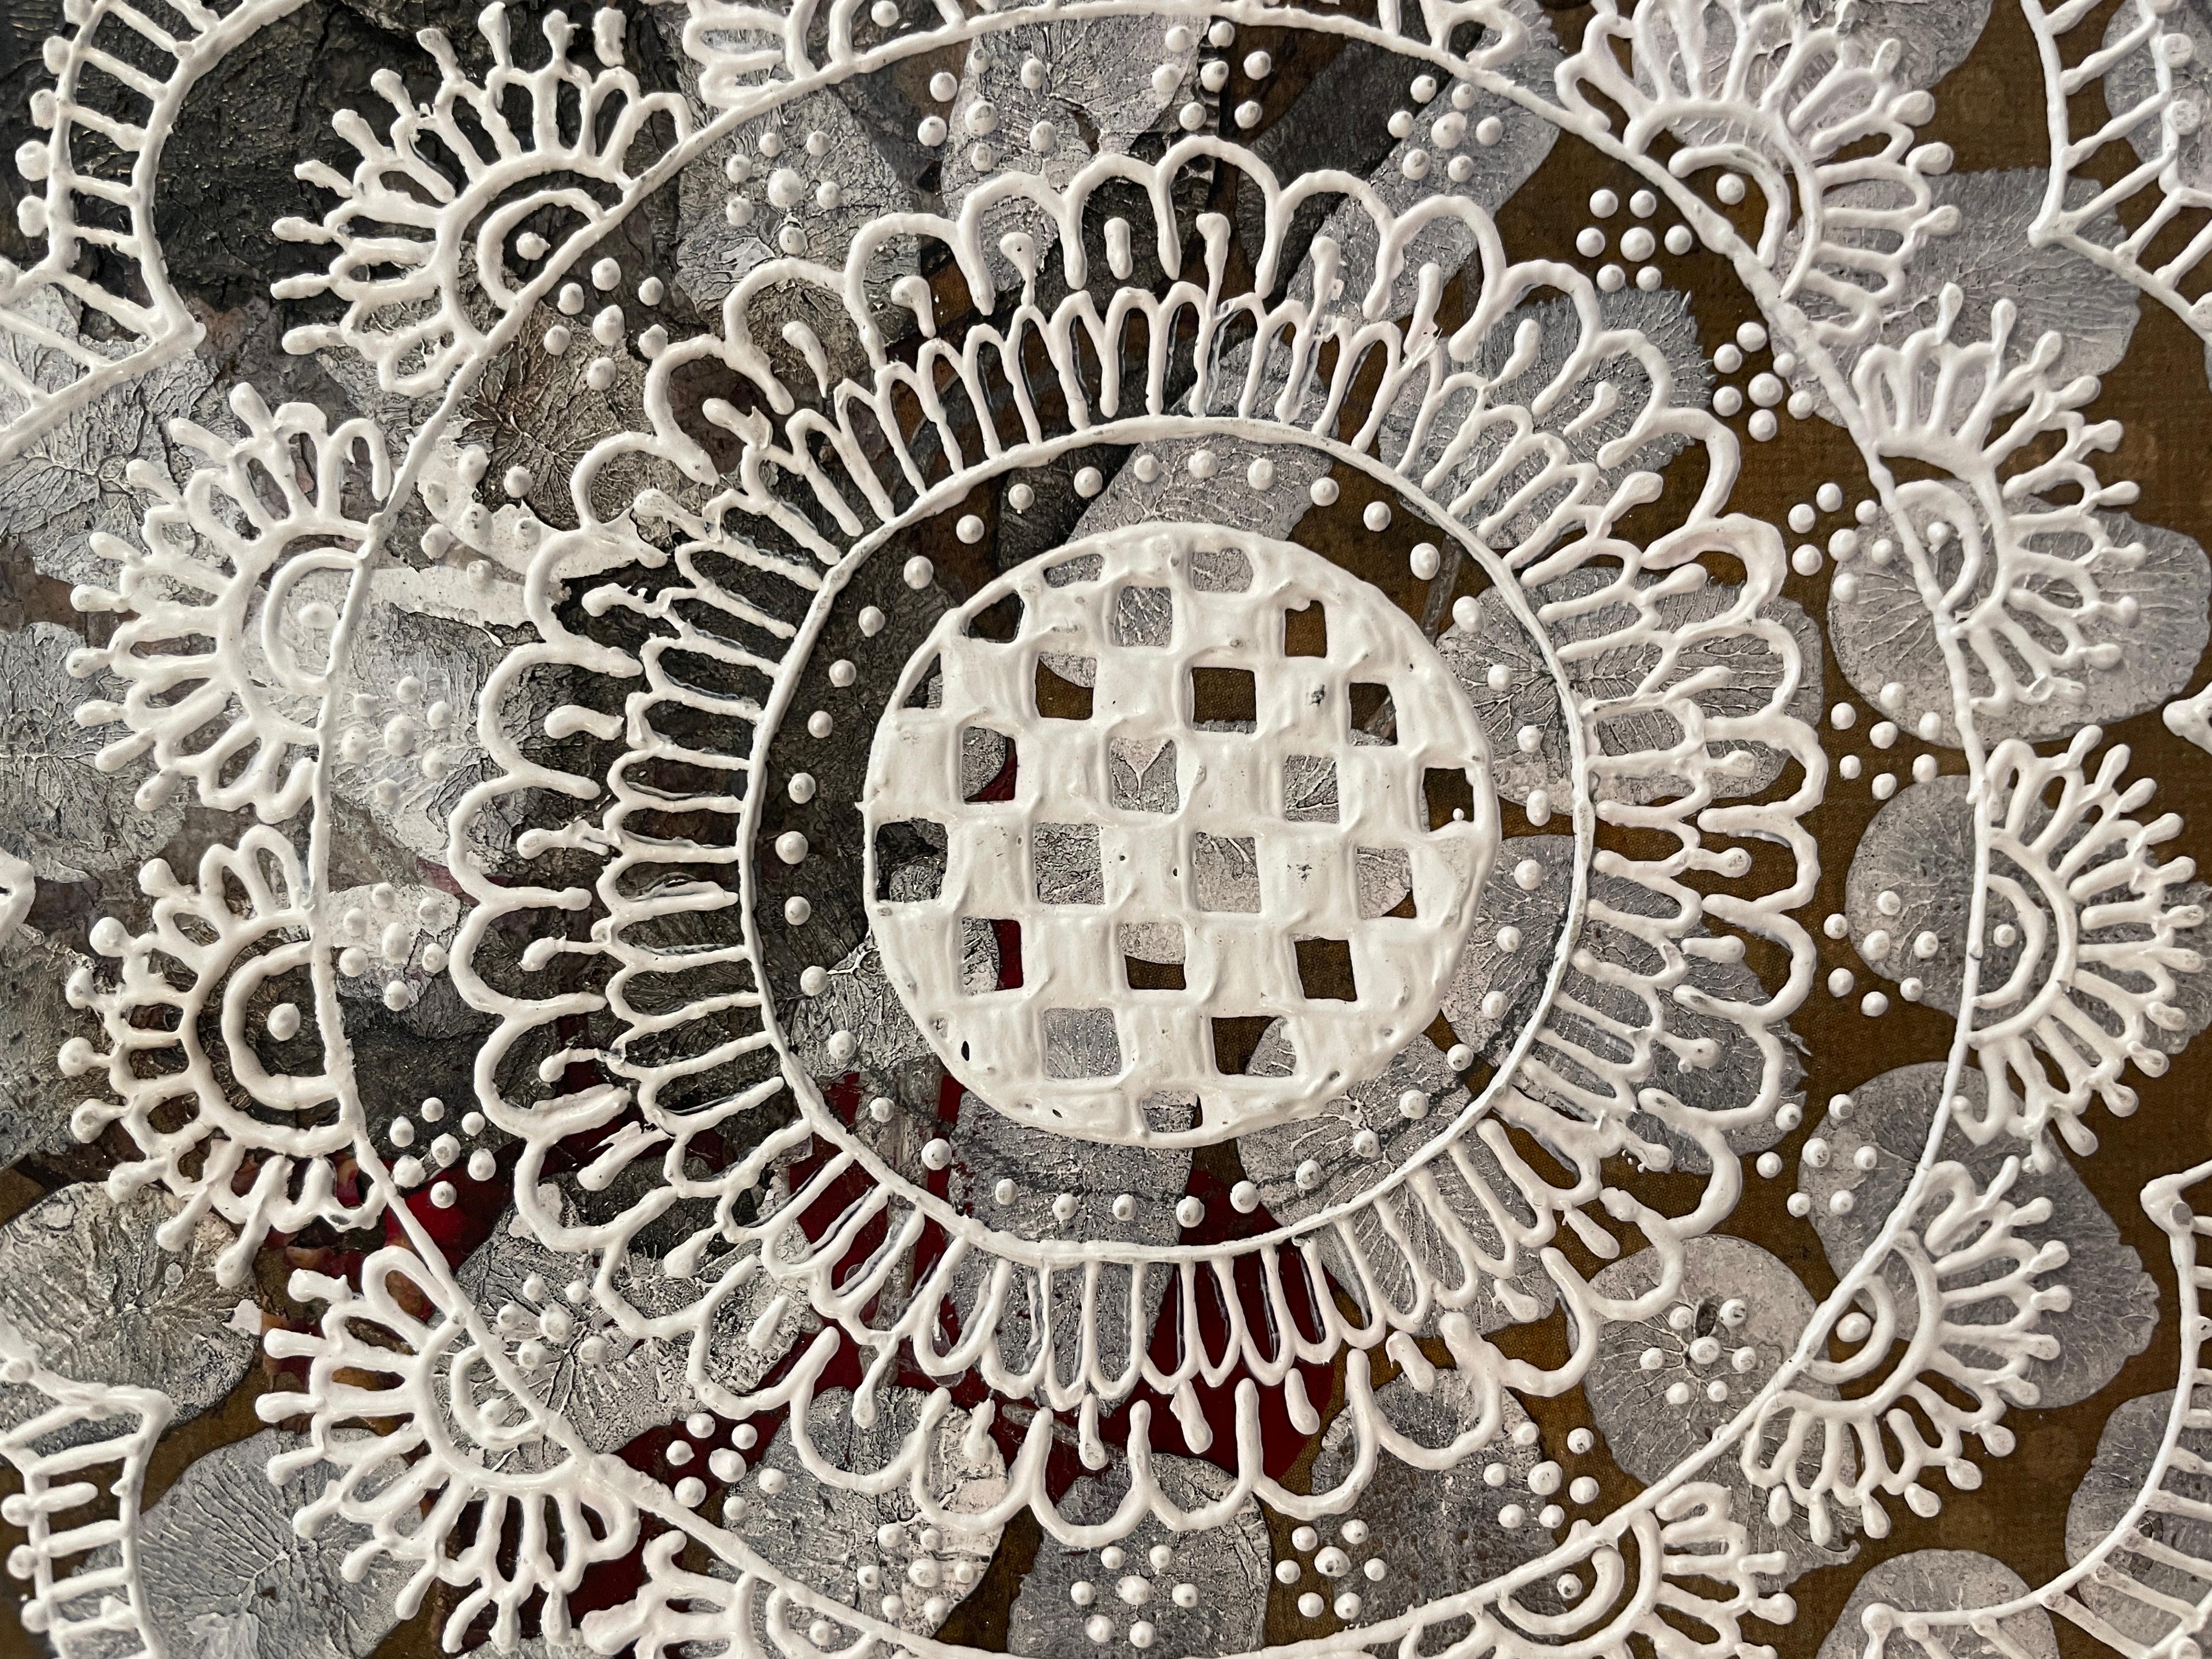 India #1: abstract painting on paper in earth tones & black w/ white mandala - Painting by Antonio Puri